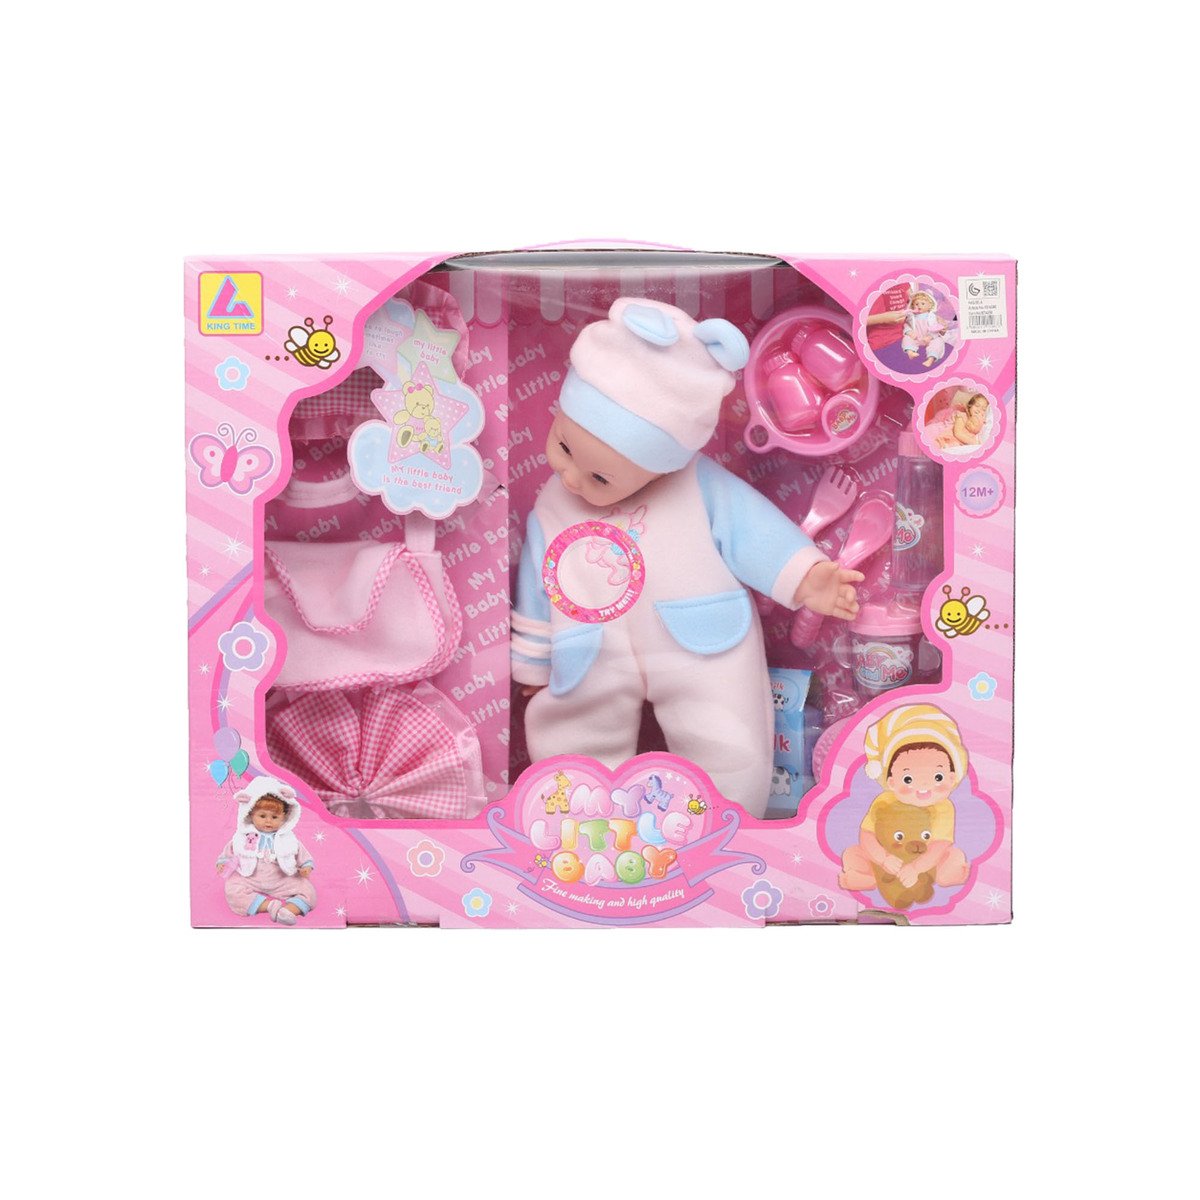 Fabiola Baby Doll 16 inch With Accessories KT4200D